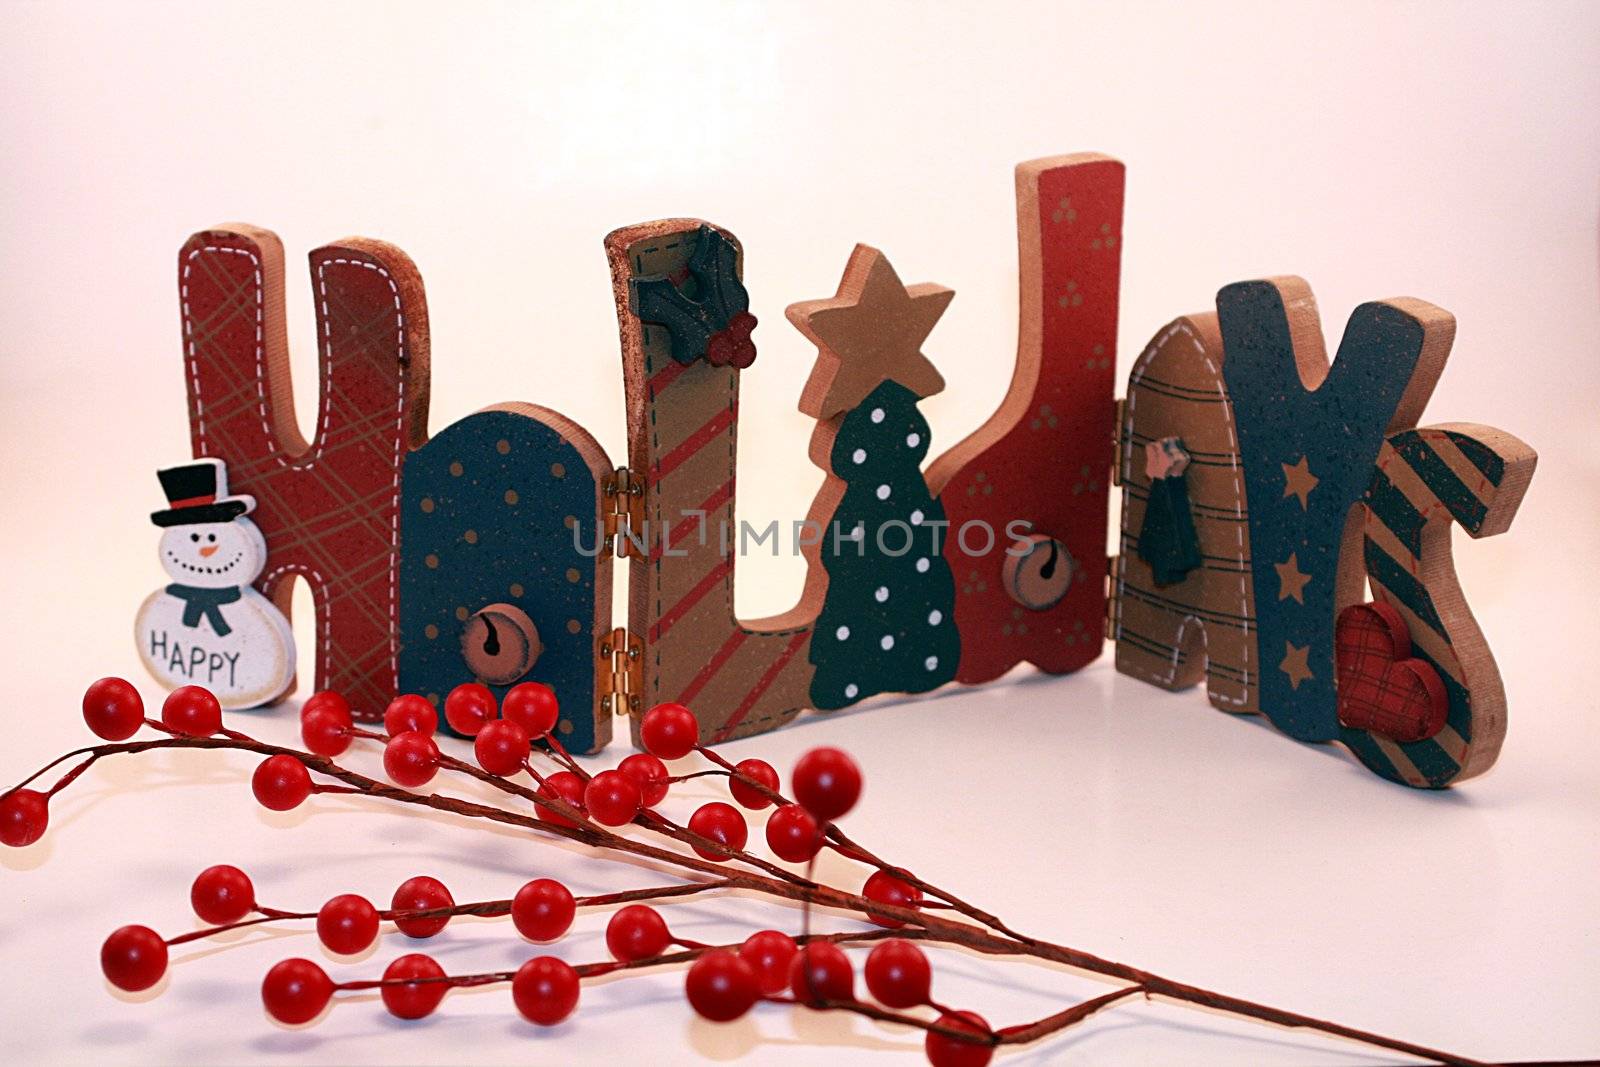 Wooden holidays sign with red holly berries in foreground. Christmas decoration is set against a white background.